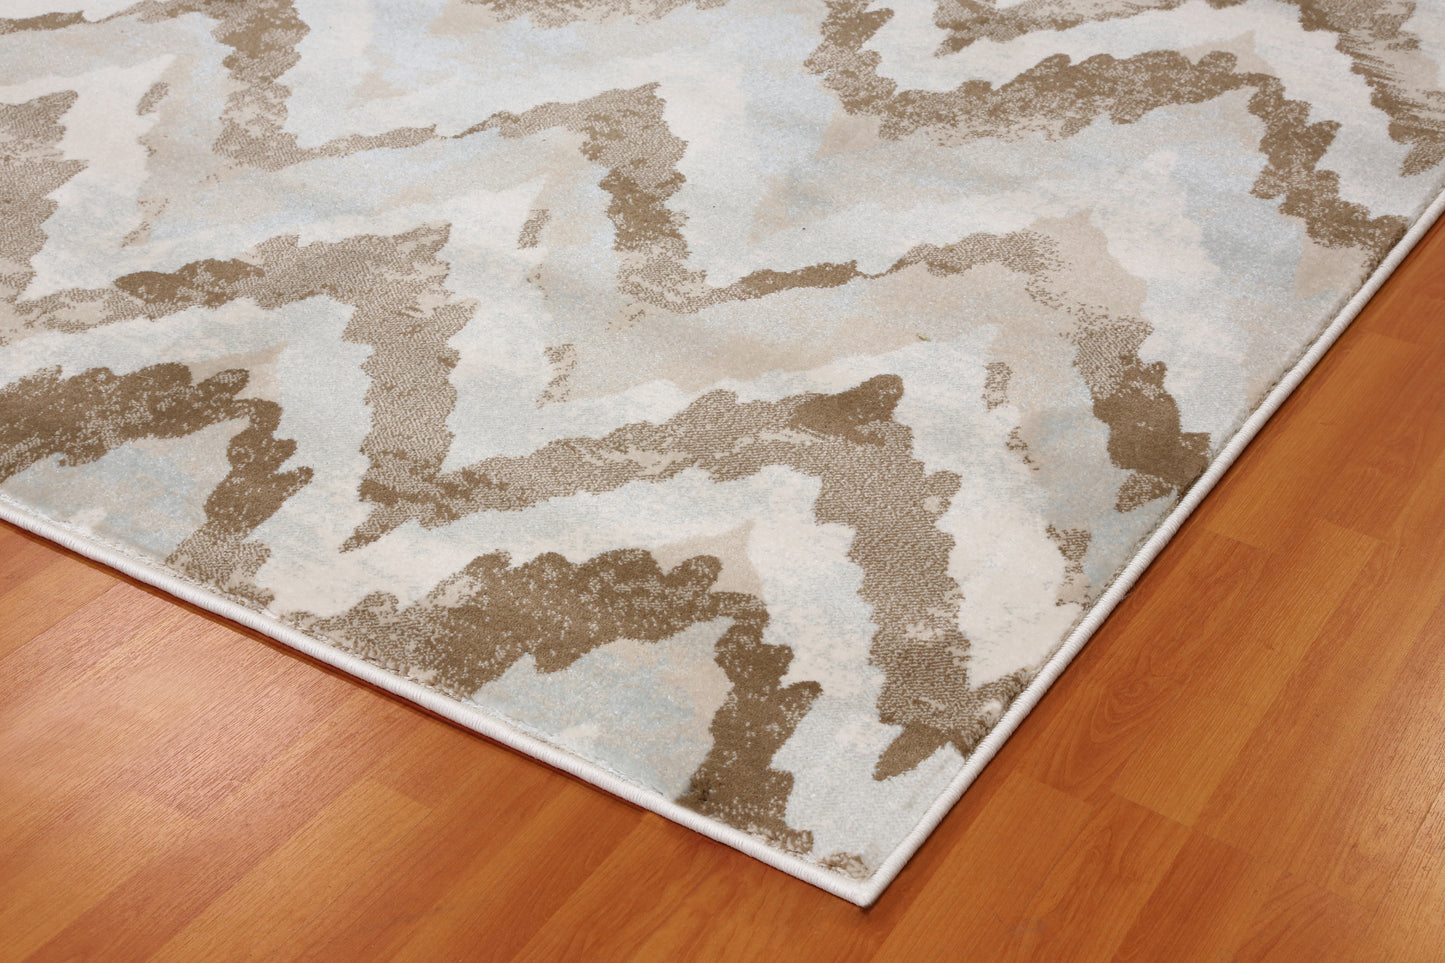 Melody 985018-117 Ivory Area Rug